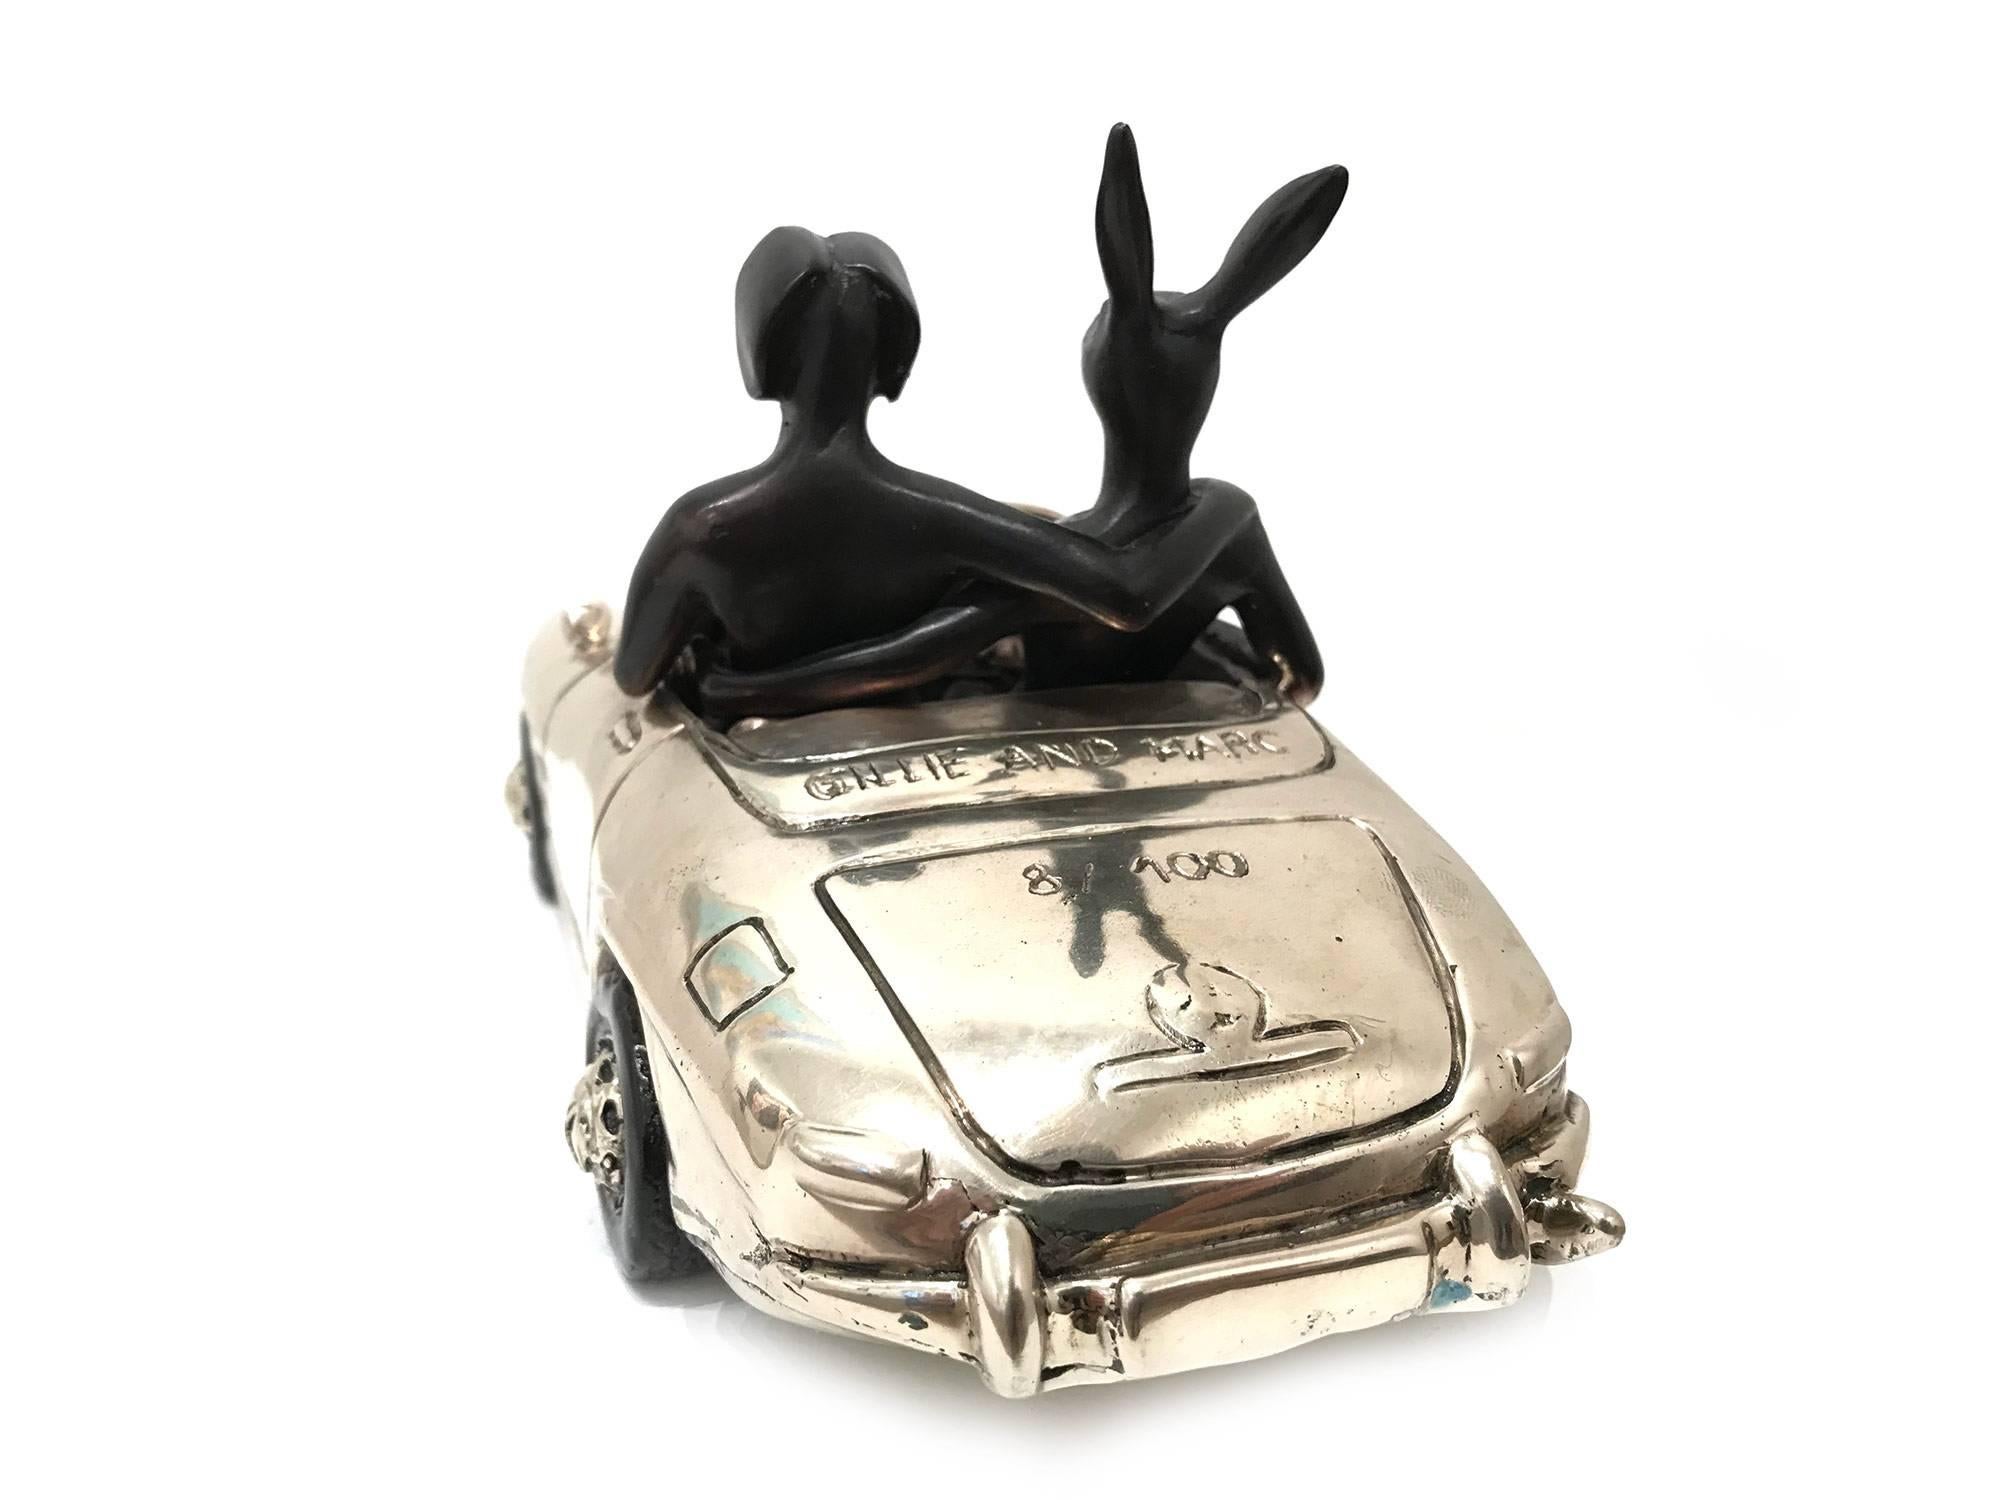 A whimsical yet very strong piece depicting the two figures from Gillie and Marc's iconic figures of the Dog/Bunny Human Hybrid, which has picked up much esteem across the globe. Here we find the figures embracing they ride in a Mercedes-Benz. This